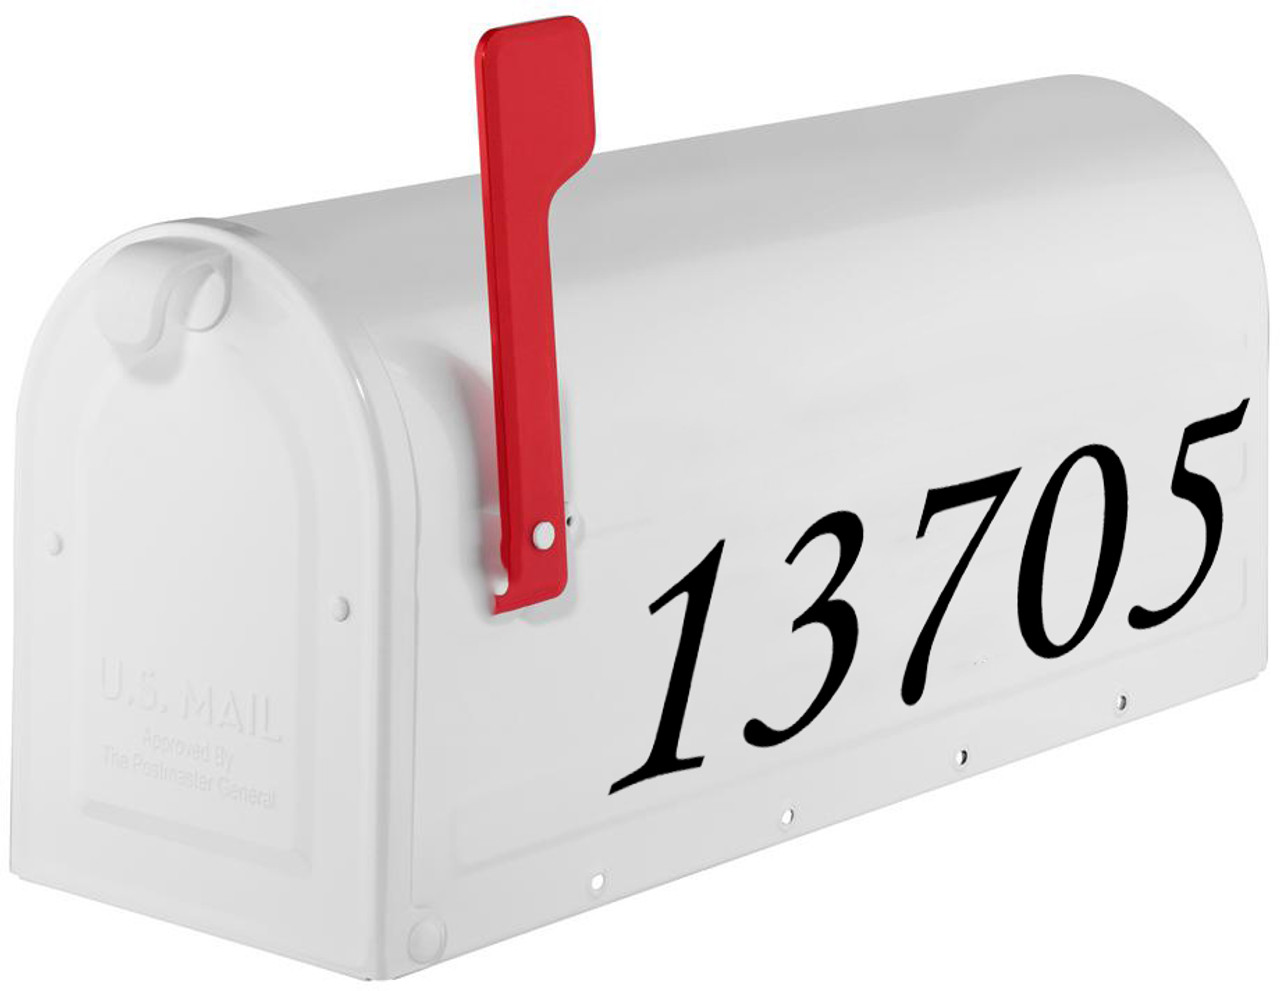 Italic Mailbox Numbers - Vinyl Sticker - 1 to 8 inches tall - Custom Personalized Name Home House Office Address - MC